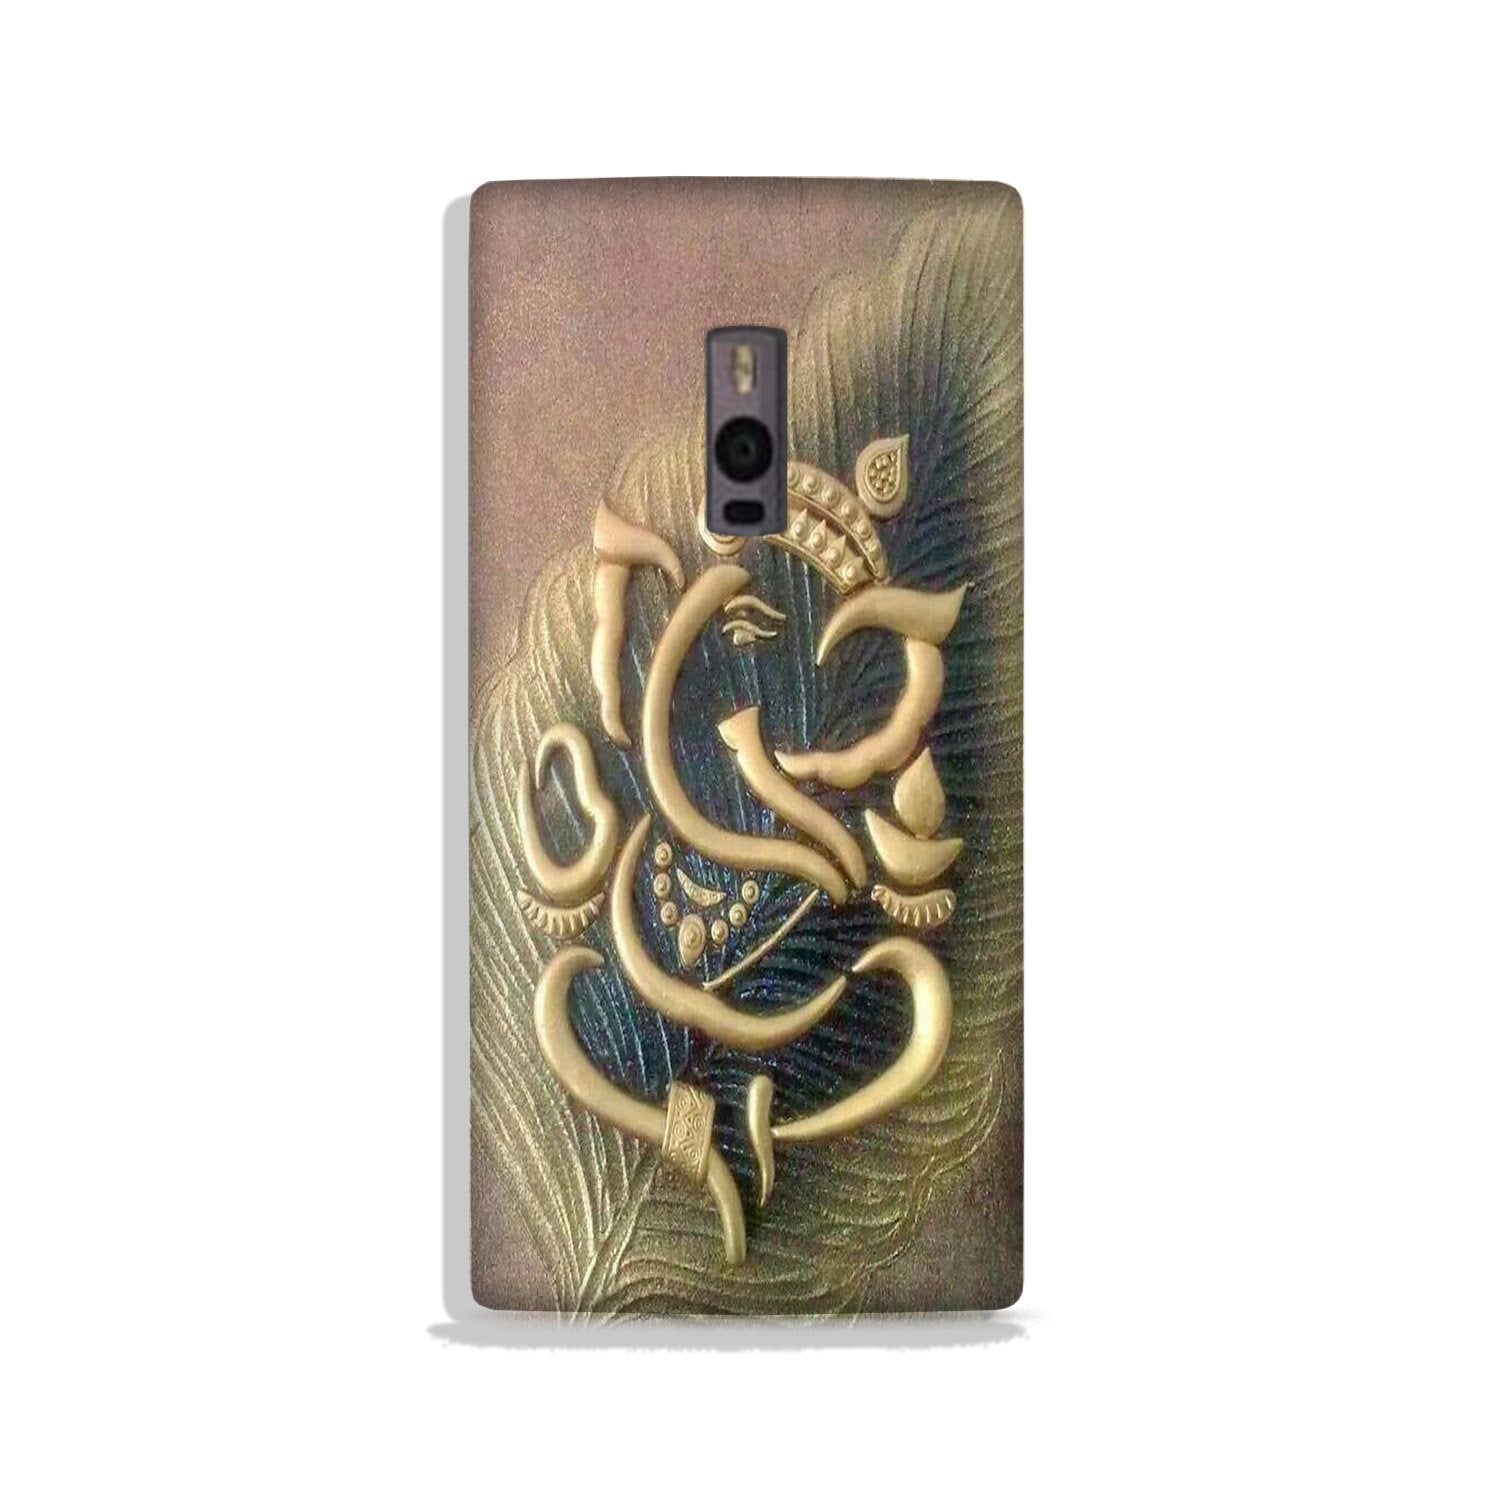 Lord Ganesha Case for OnePlus 2